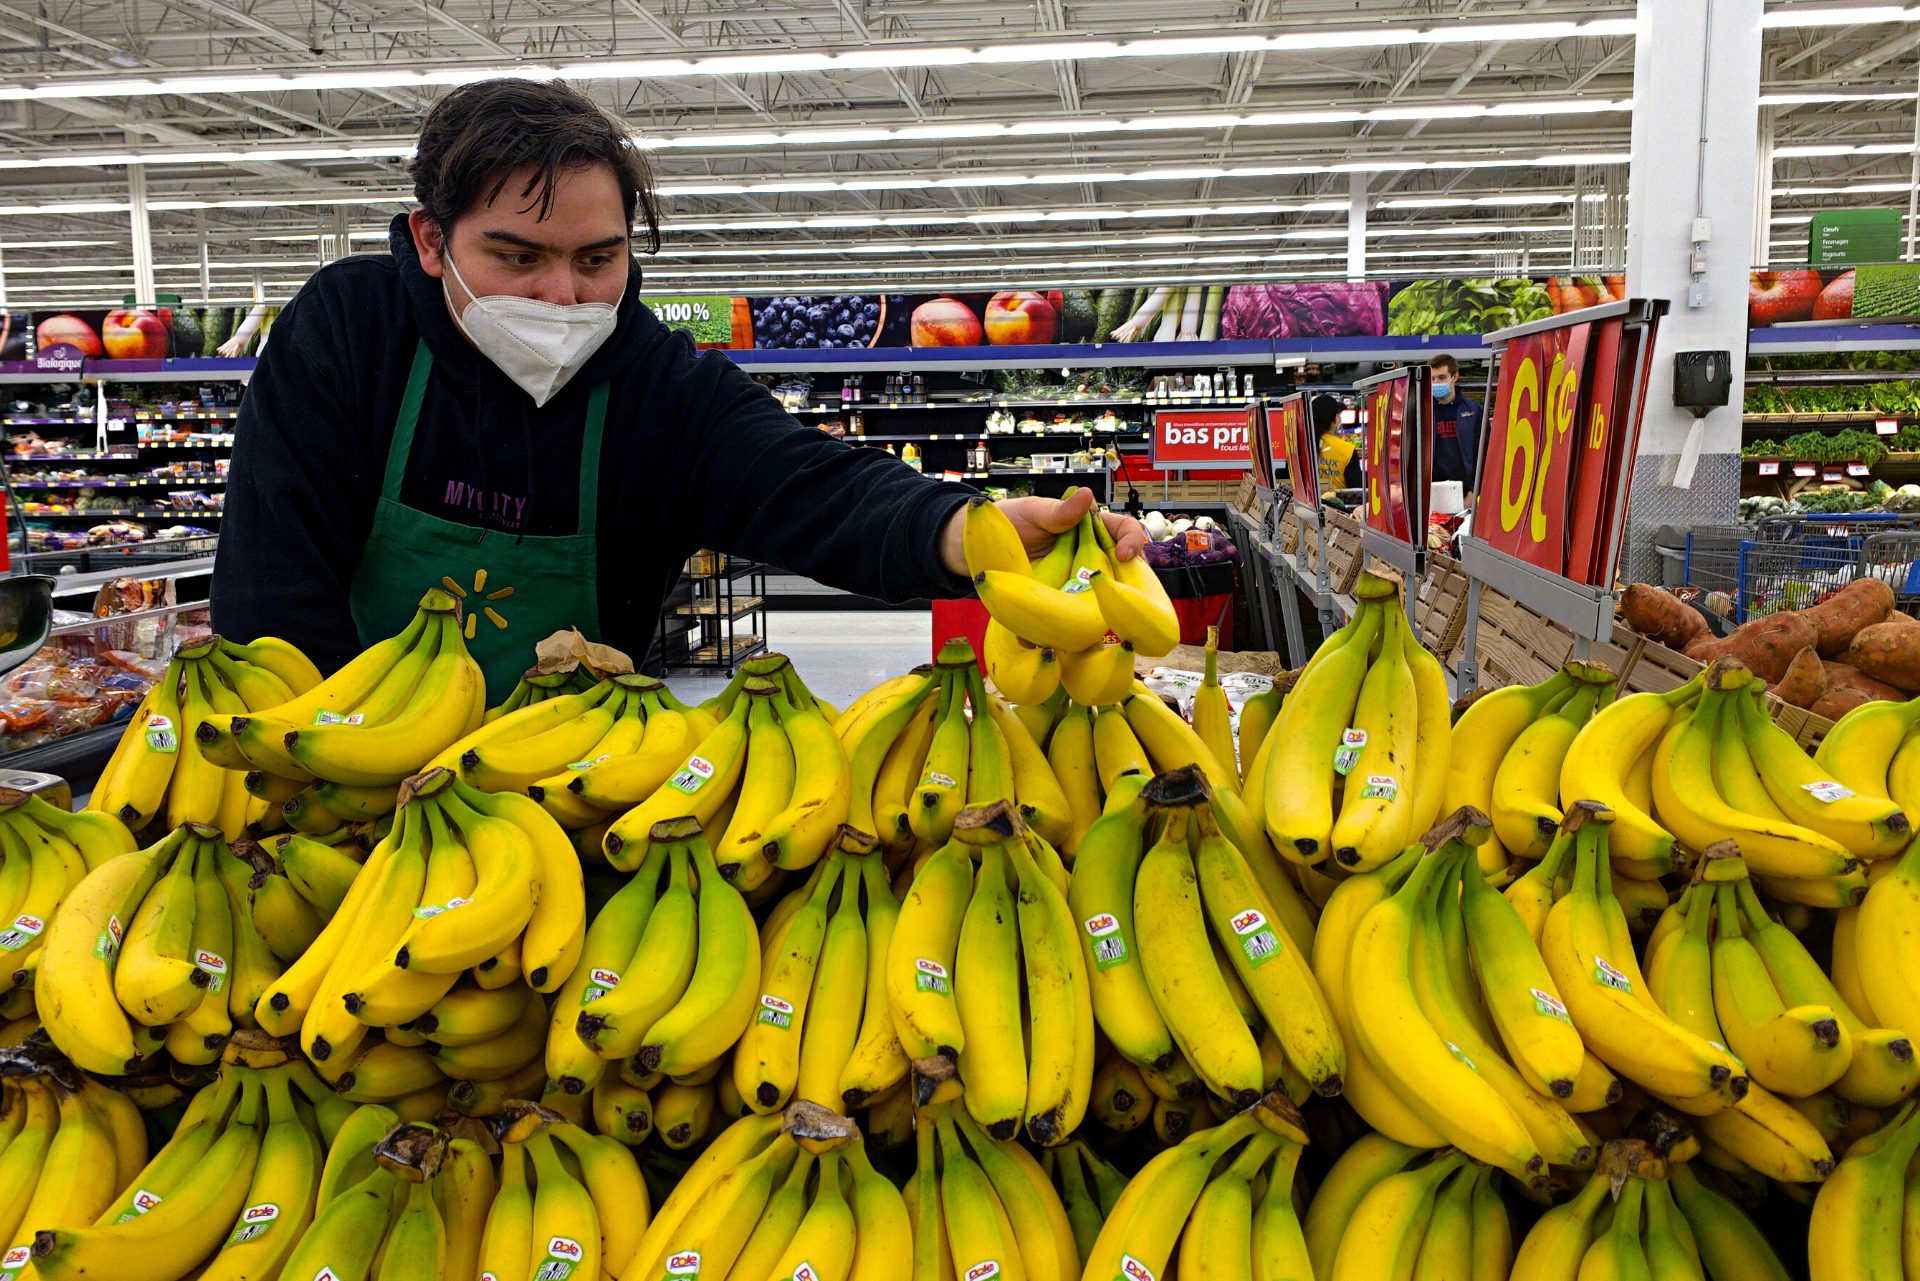 Man reaches out to place a bunch of bananas onto a display.